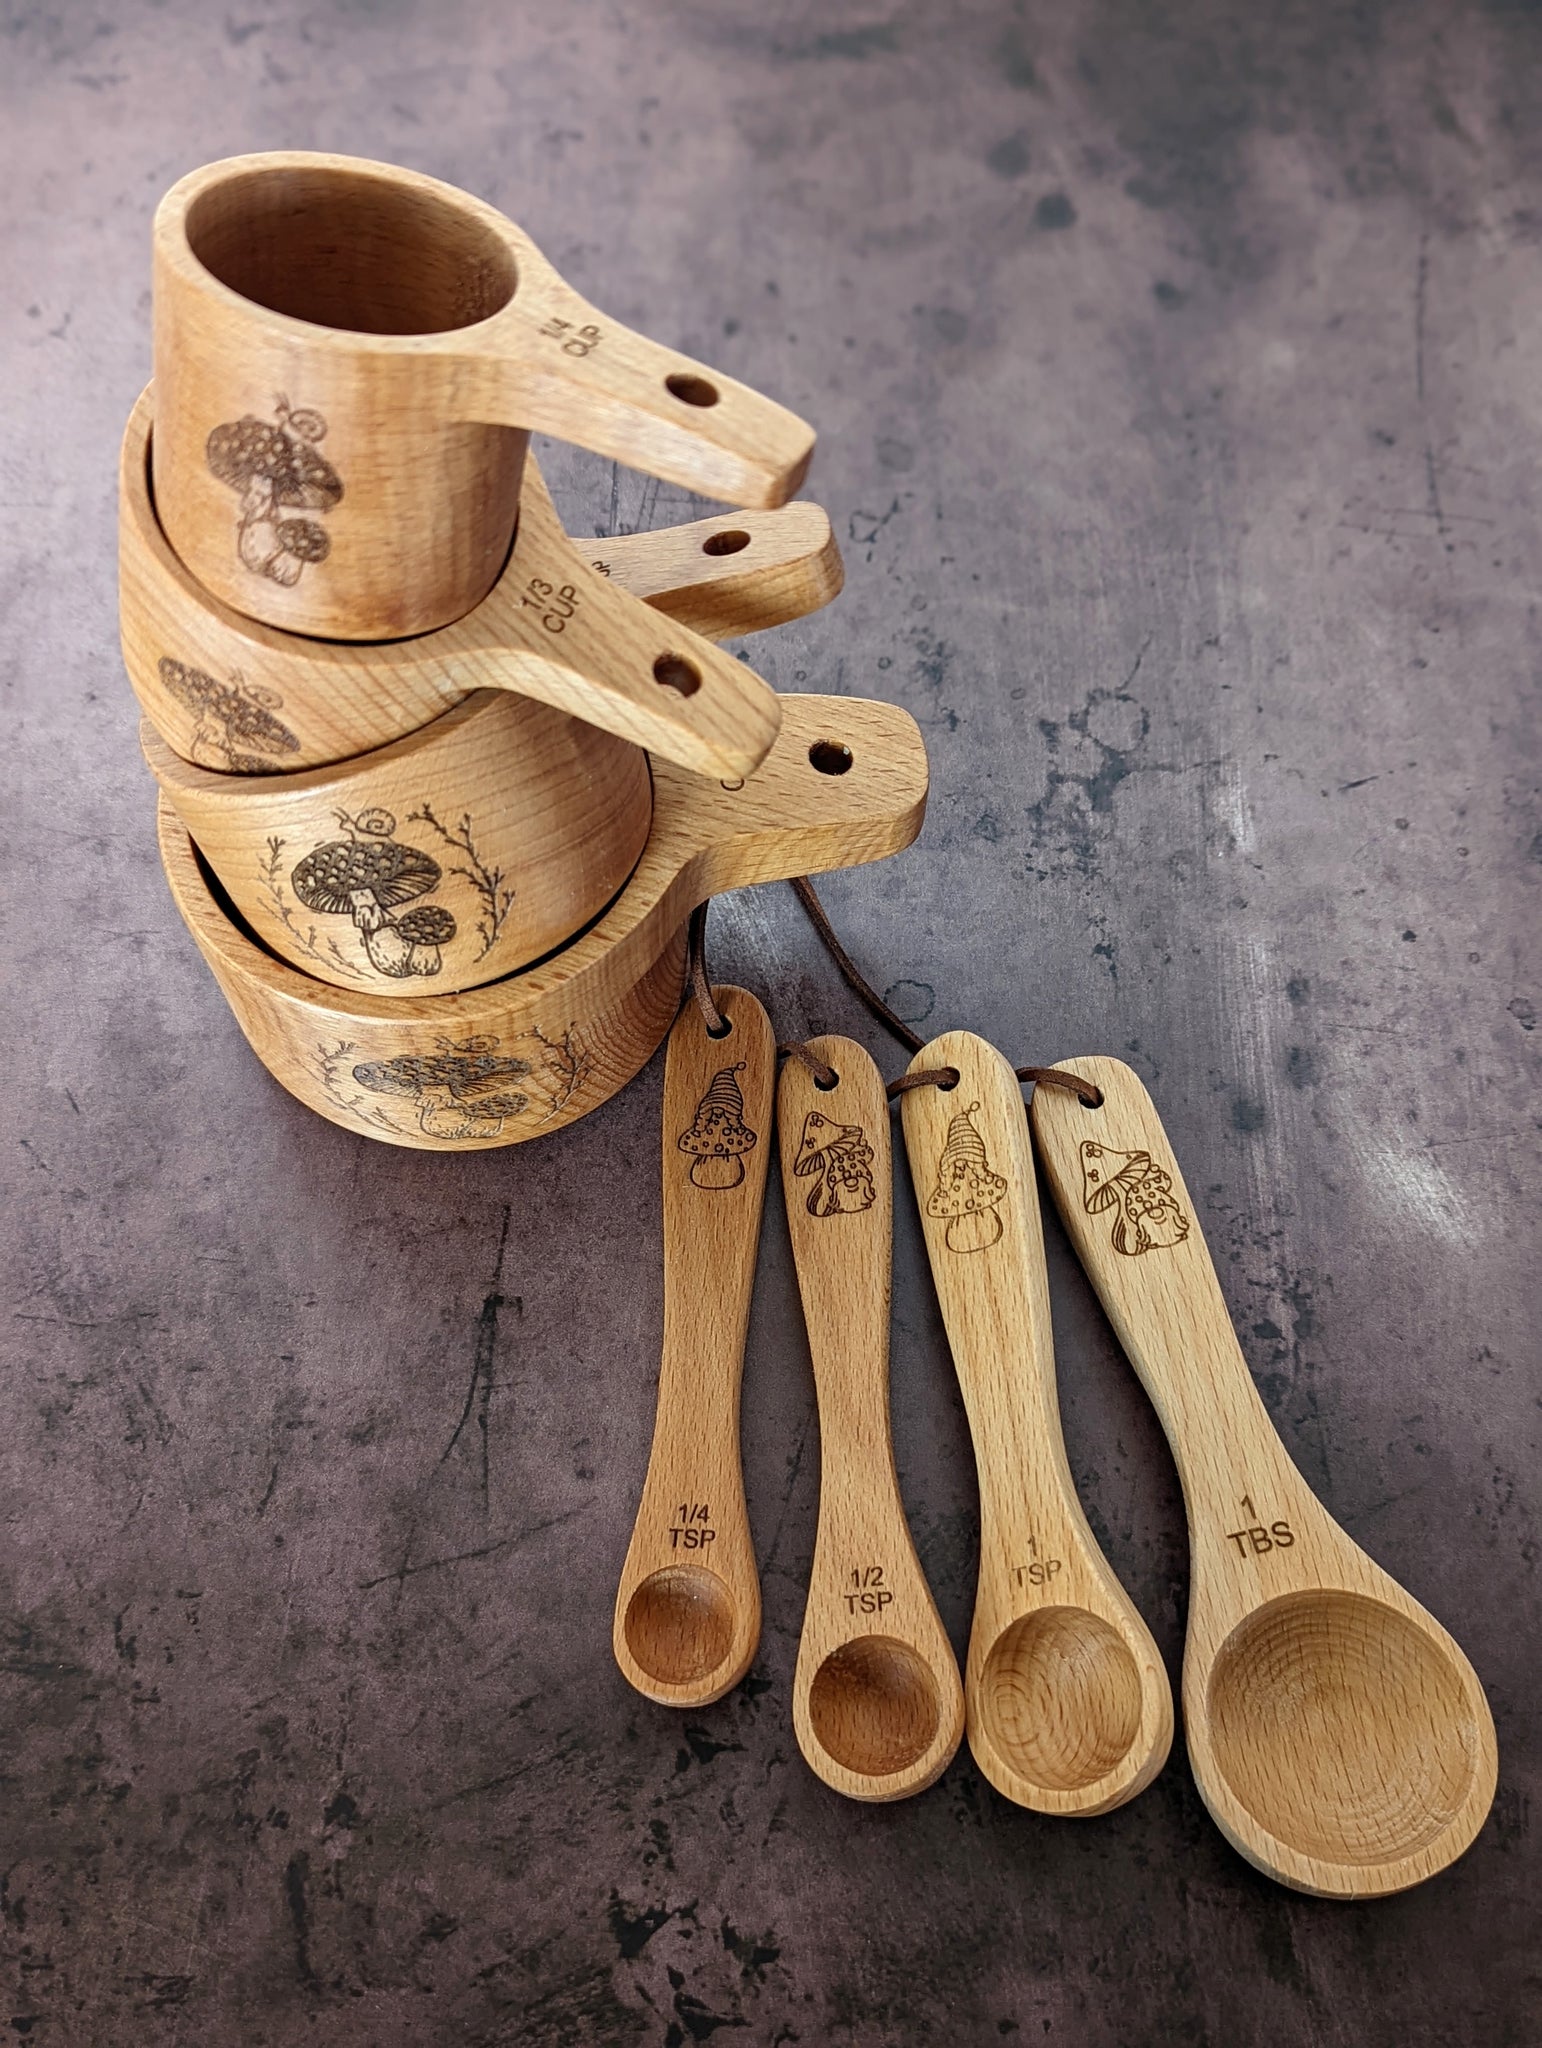 Metal Measuring Cups, Measuring Spoons, Baking Gifts, Christmas Gift for  Mom From Daughter, 